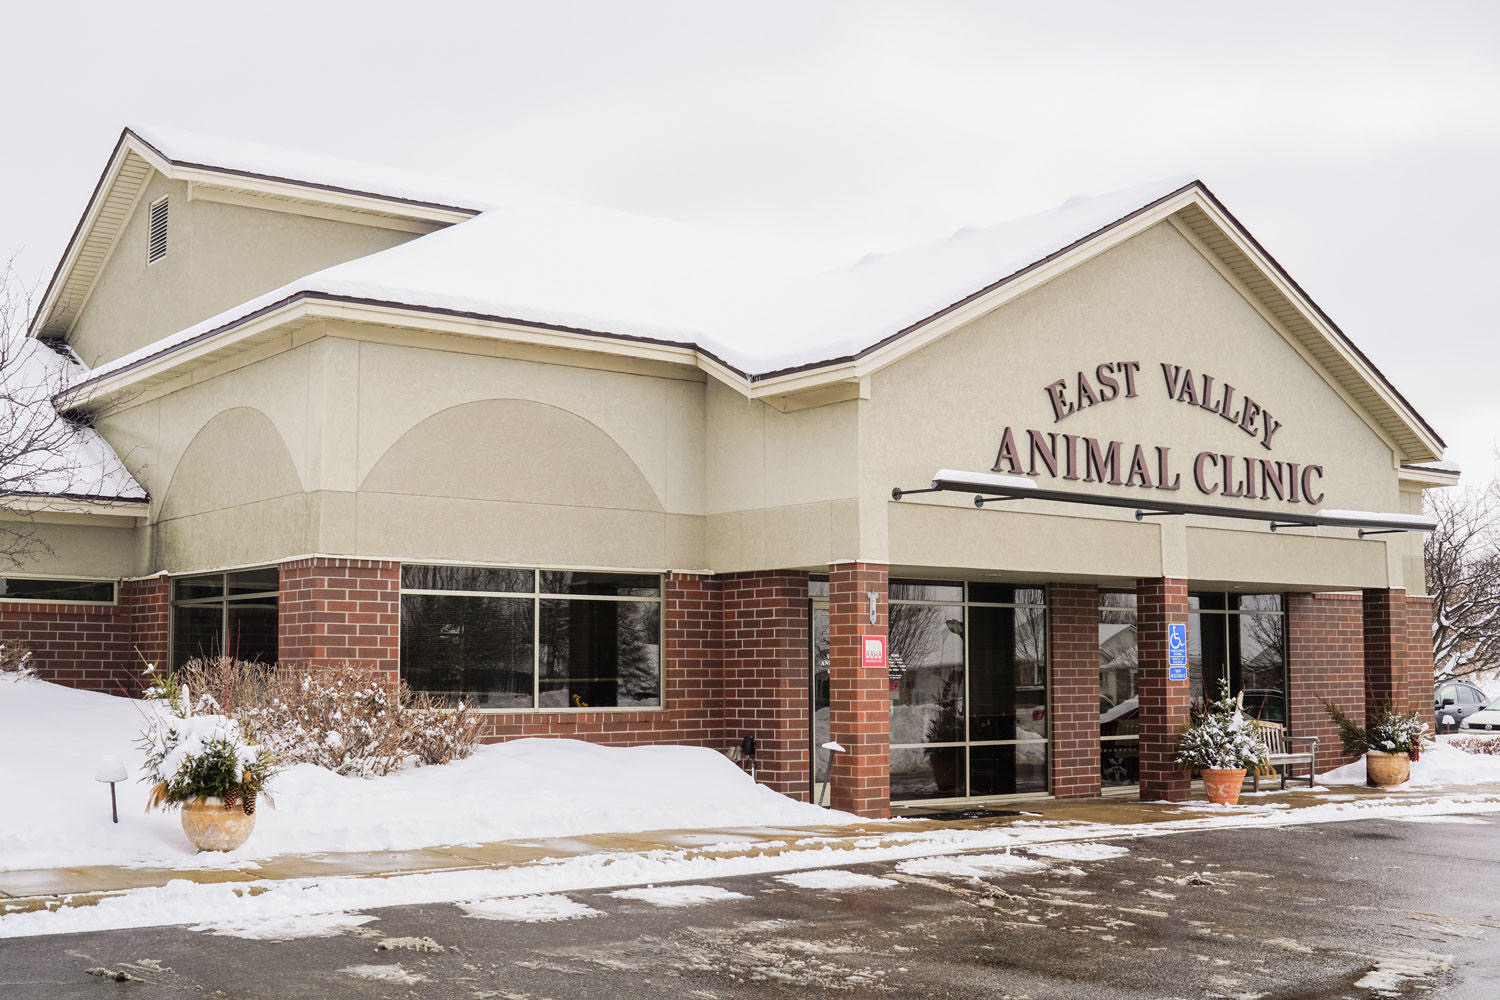 East Valley Animal Clinic